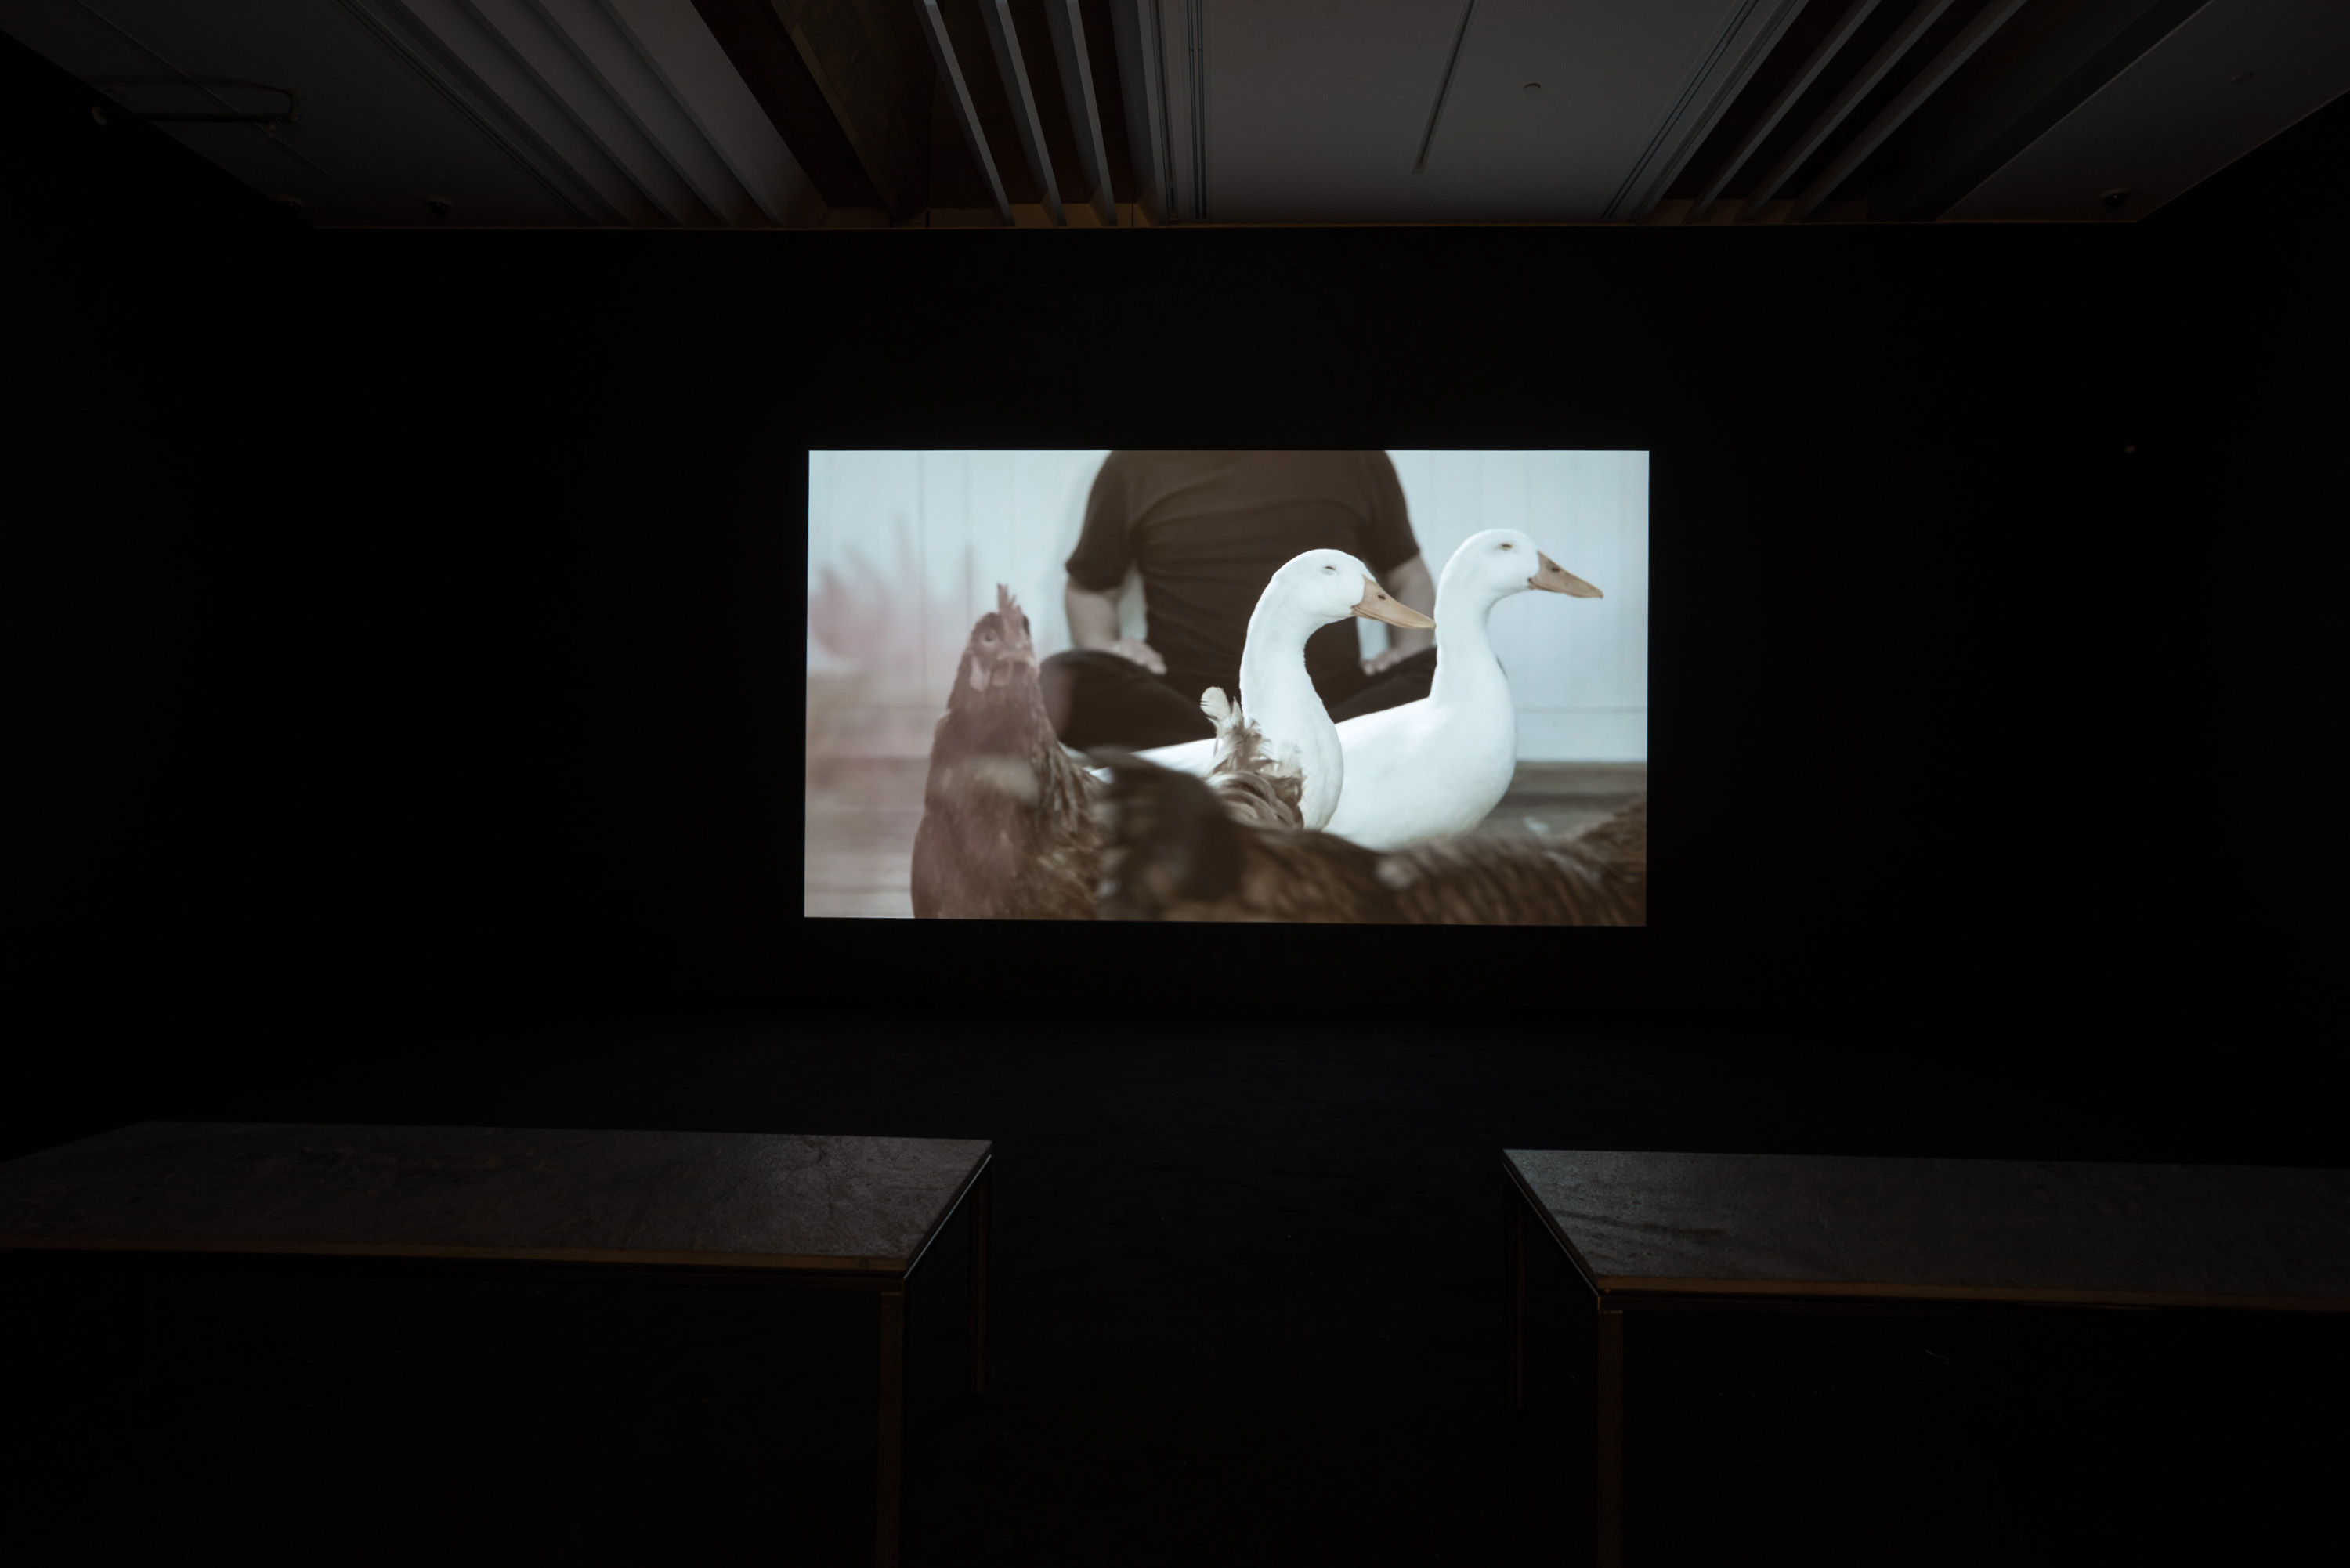 Shannon Te Ao, Two shoots that stretch far out (video still) (2013–14). HD video, single-channel, 13:22 min, colour, stereo sound. Exhibition view: Auckland Art Gallery Toi o Tāmaki (2016).